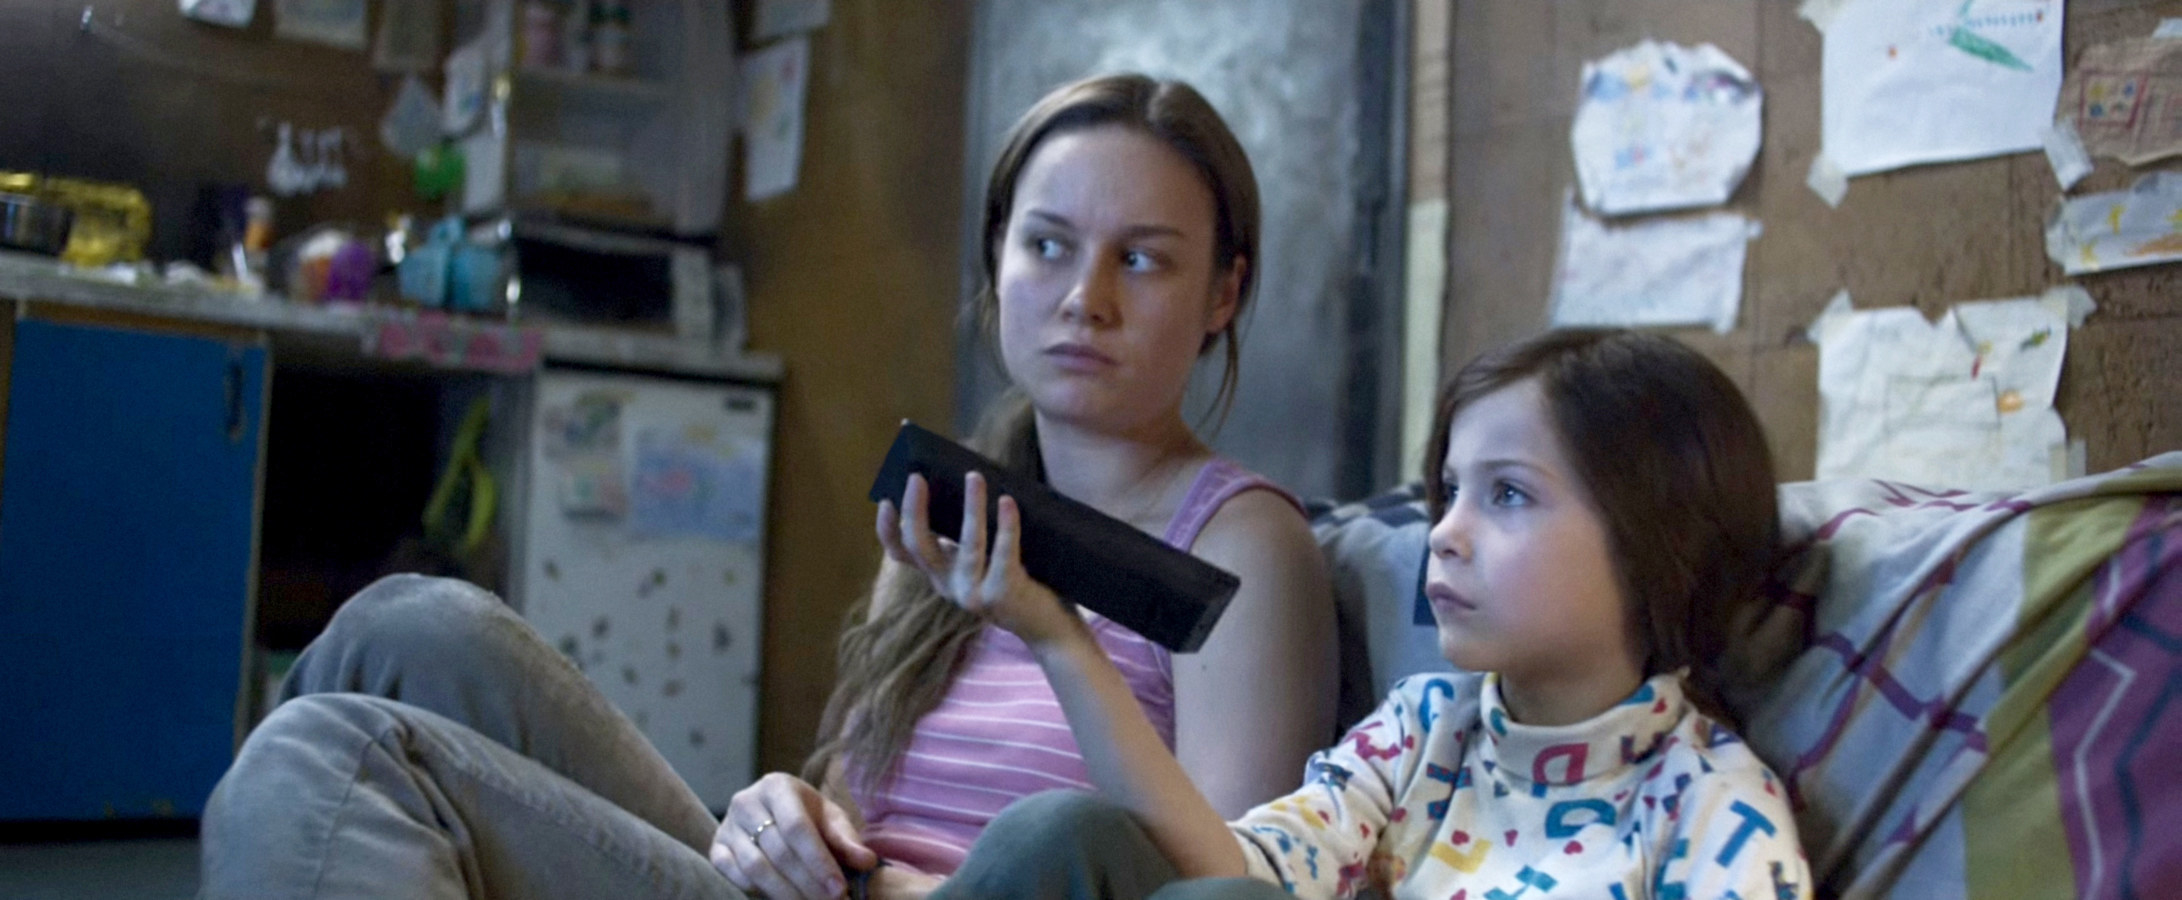 Brie Larson and Jacob Tremblay in Room